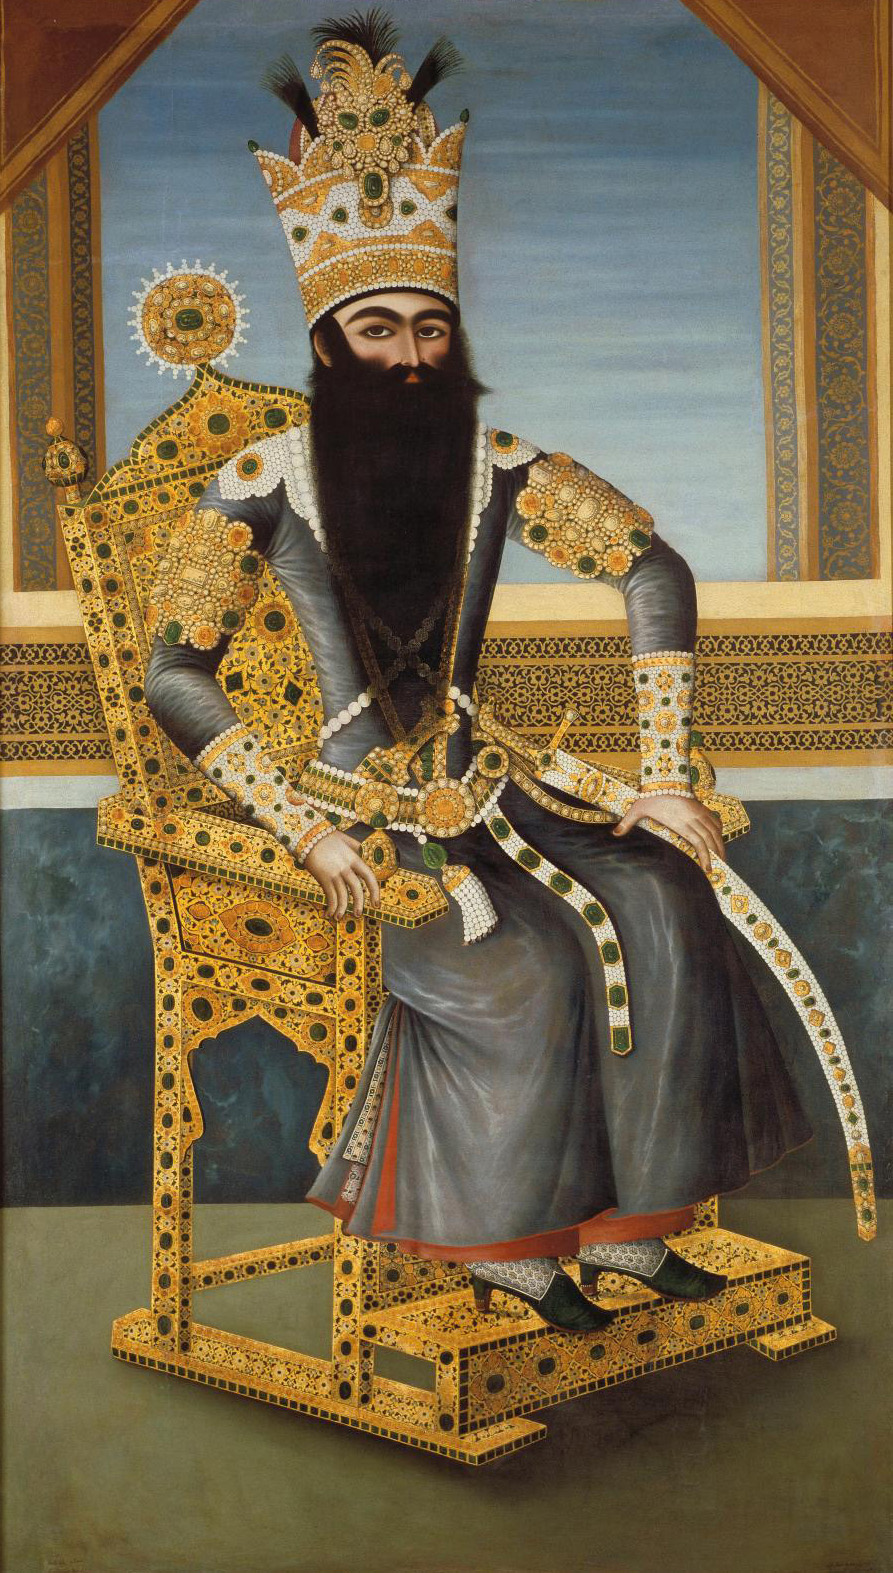 Attributed to Mihr 'Ali, Iran, 1800-1806, Portrait of Fath 'Ali Shah, oil on canvas, Paris, Musée du Louvre, loaned by the Château-Domaine